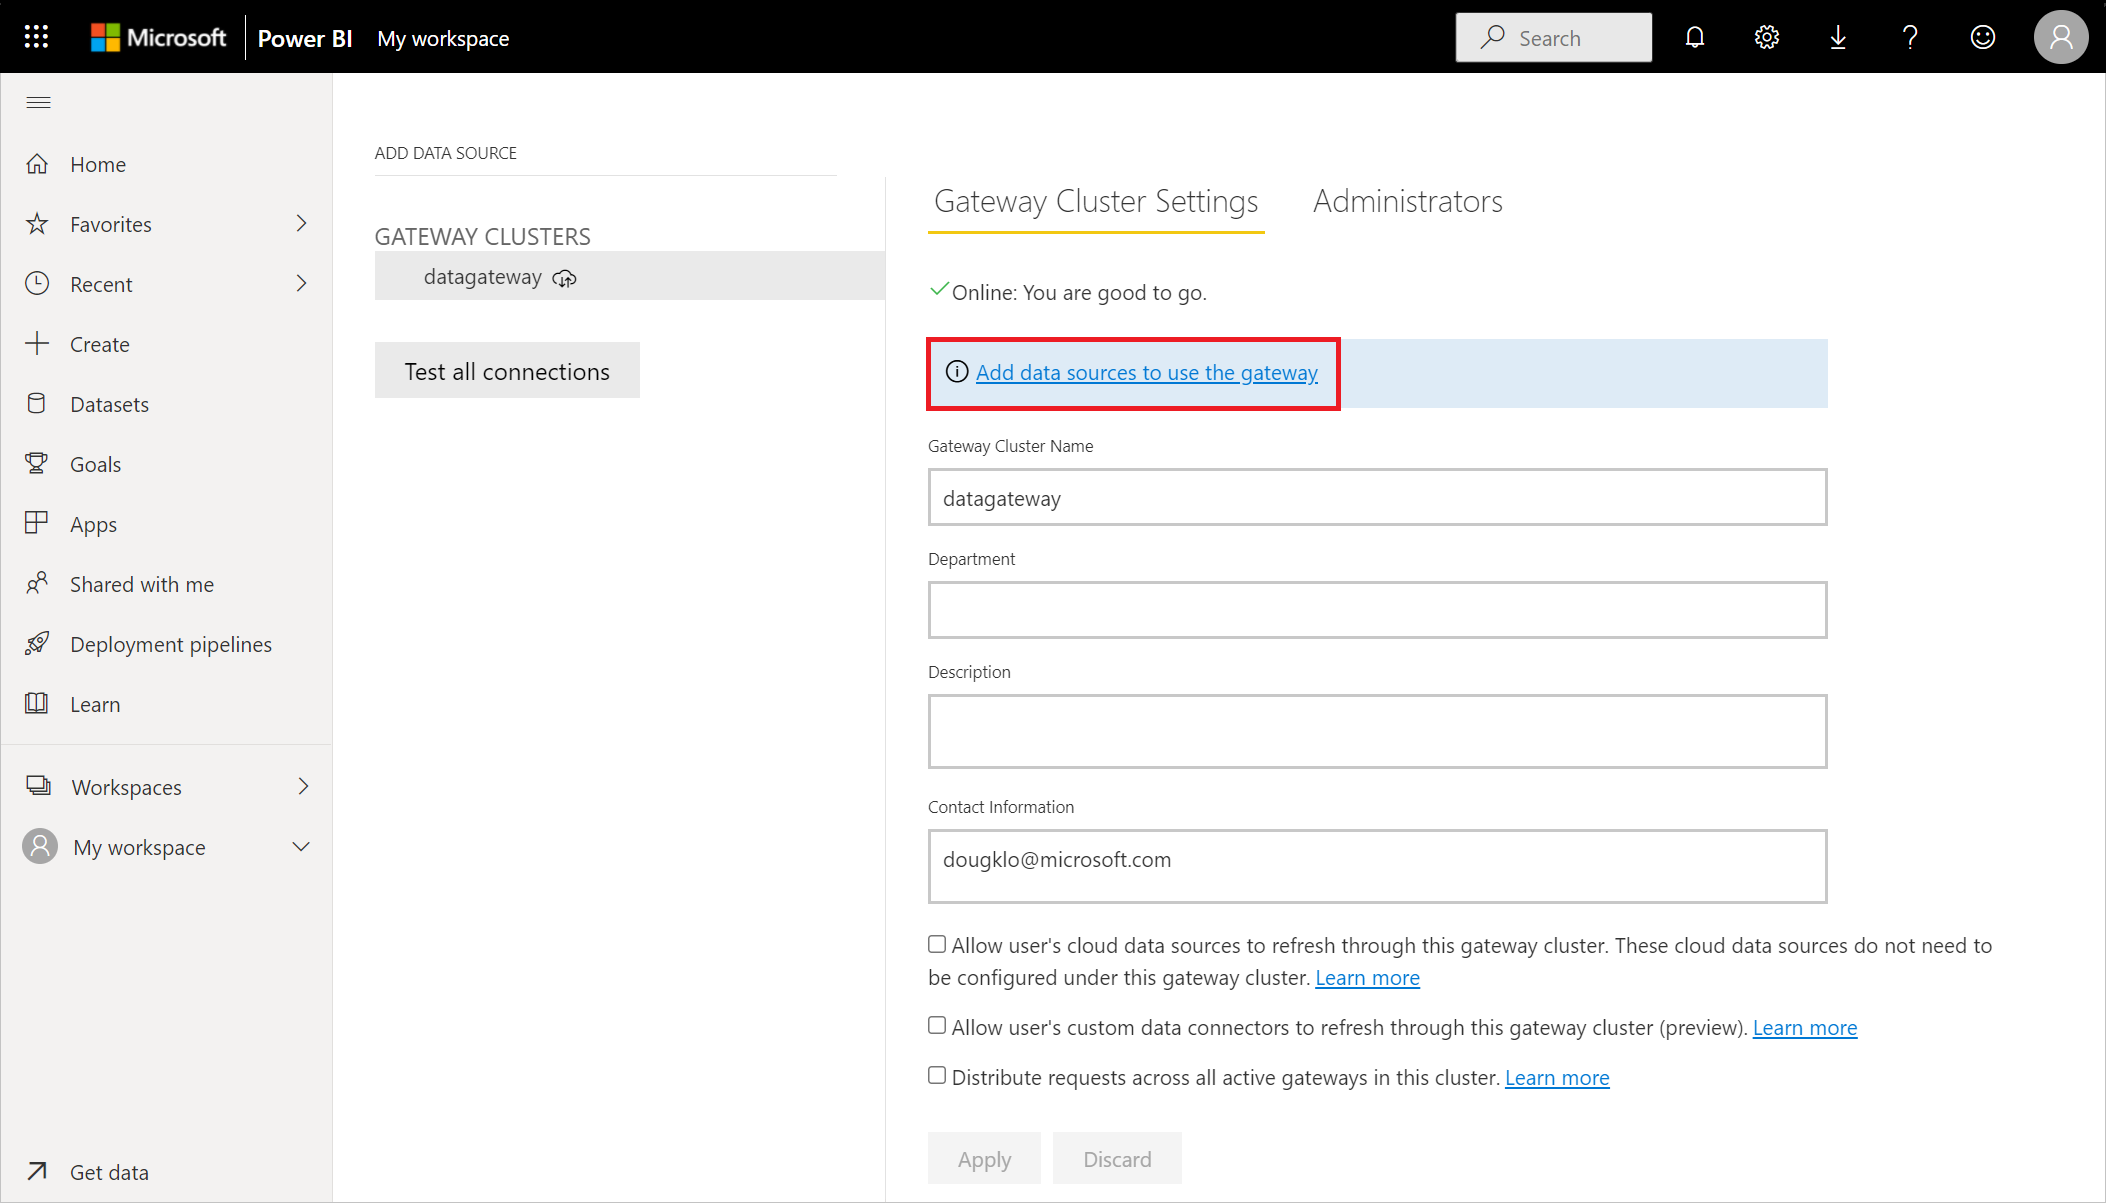 Image of the Add data source window in Power BI service, with Add data source to use the gateway emphasized.